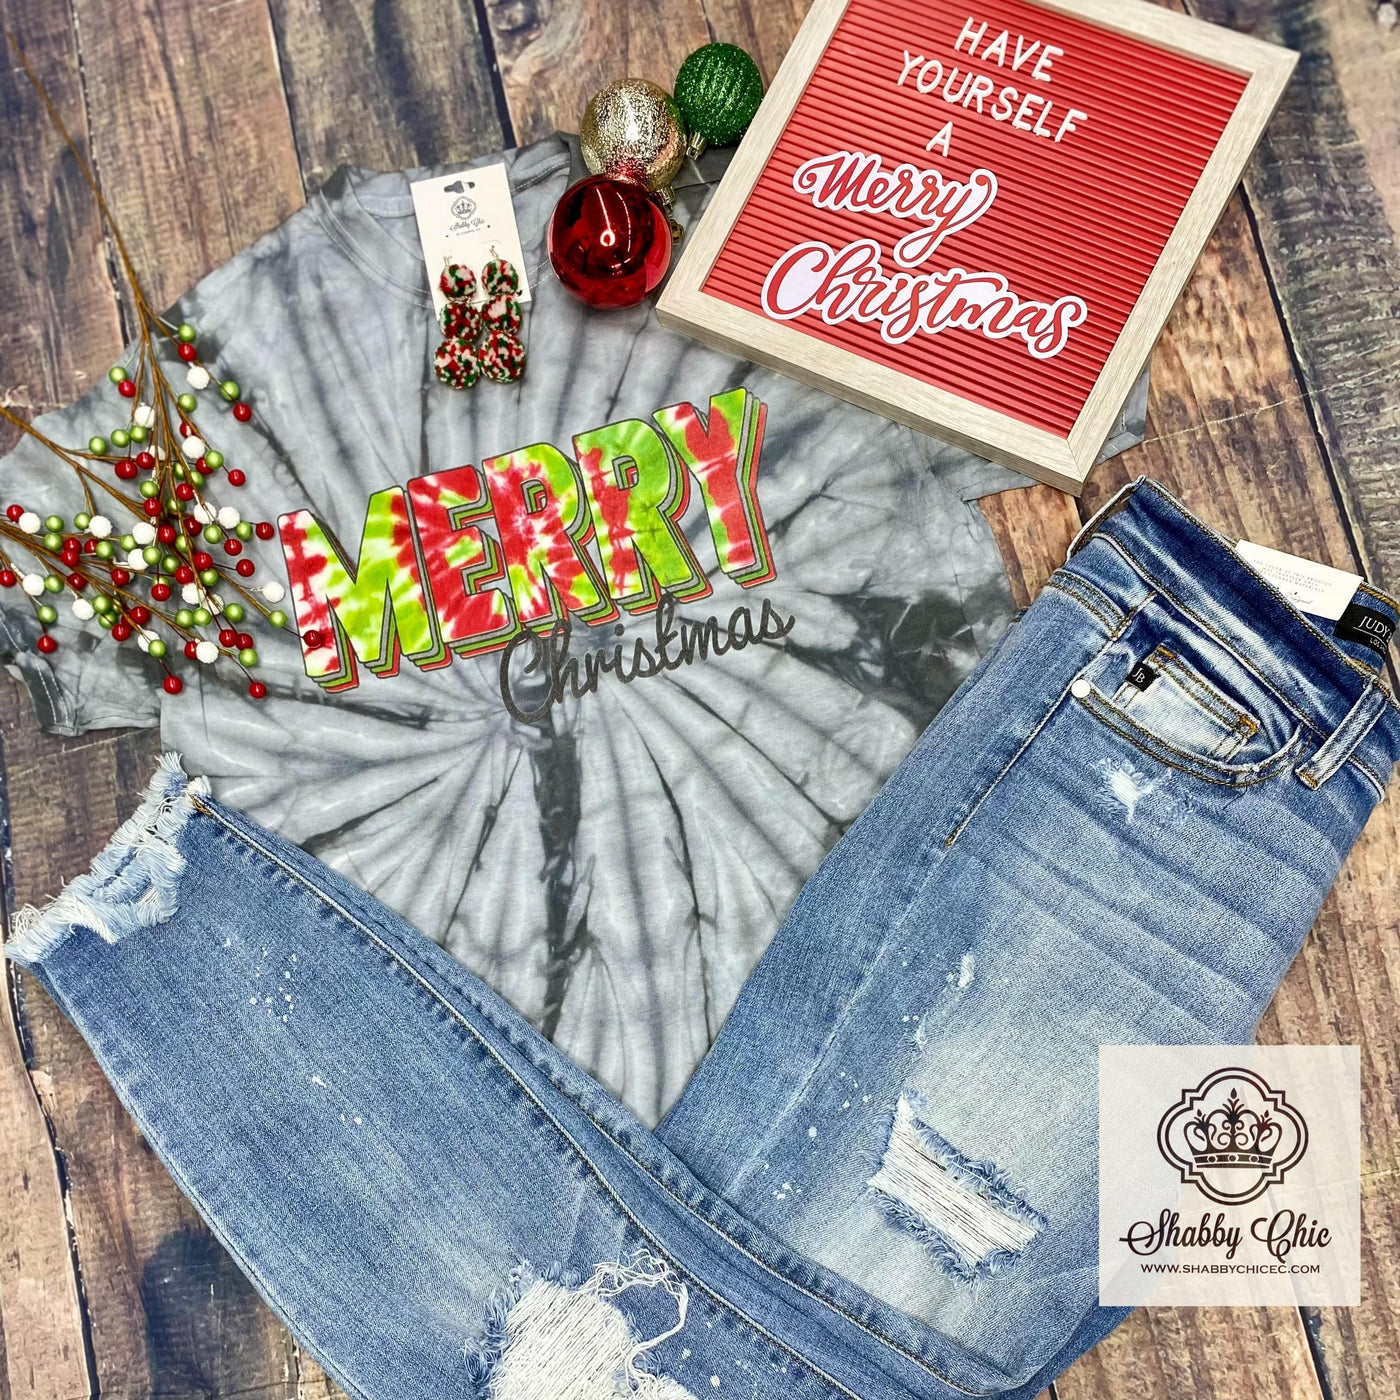 Merry Christmas (Tie Dye) Tee Shabby Chic Boutique and Tanning Salon